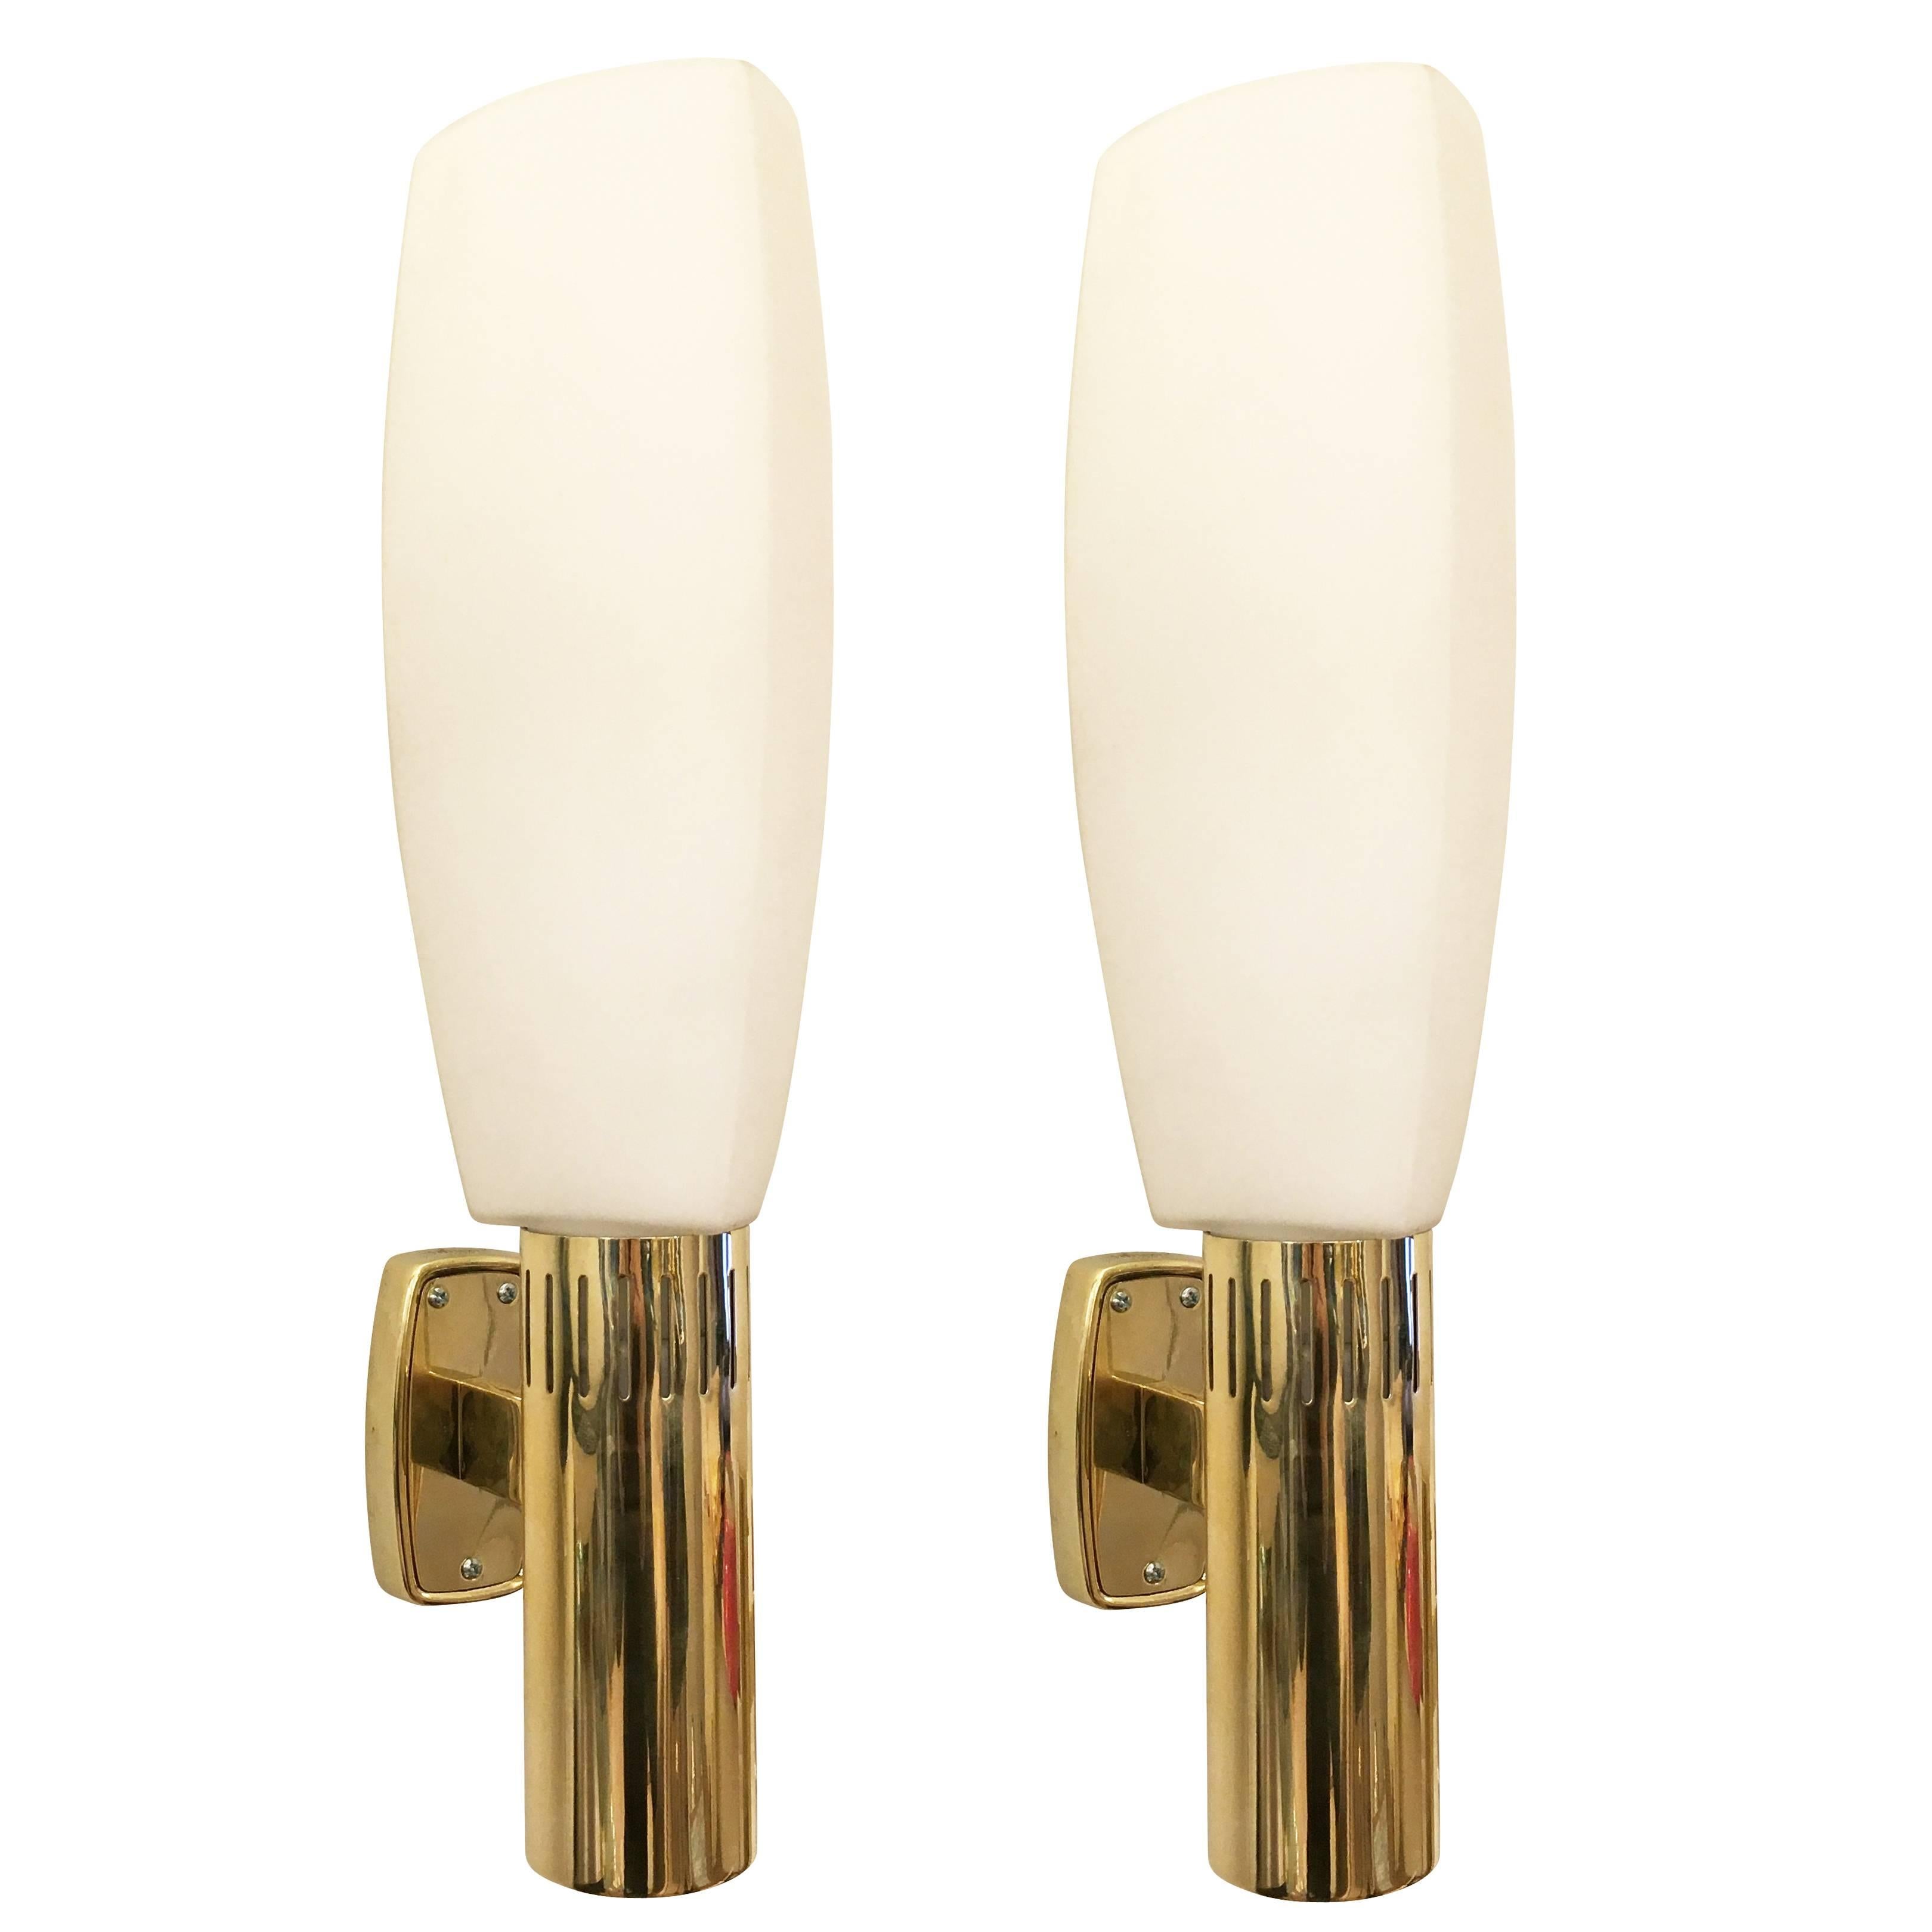 Large Stilnovo sconces with triangular frosted glass shades and polished brass frames. Each is marked on the backplate. Two with all bronze frames are also available.

Condition: Excellent vintage condition, minor wear consistent with age and use.